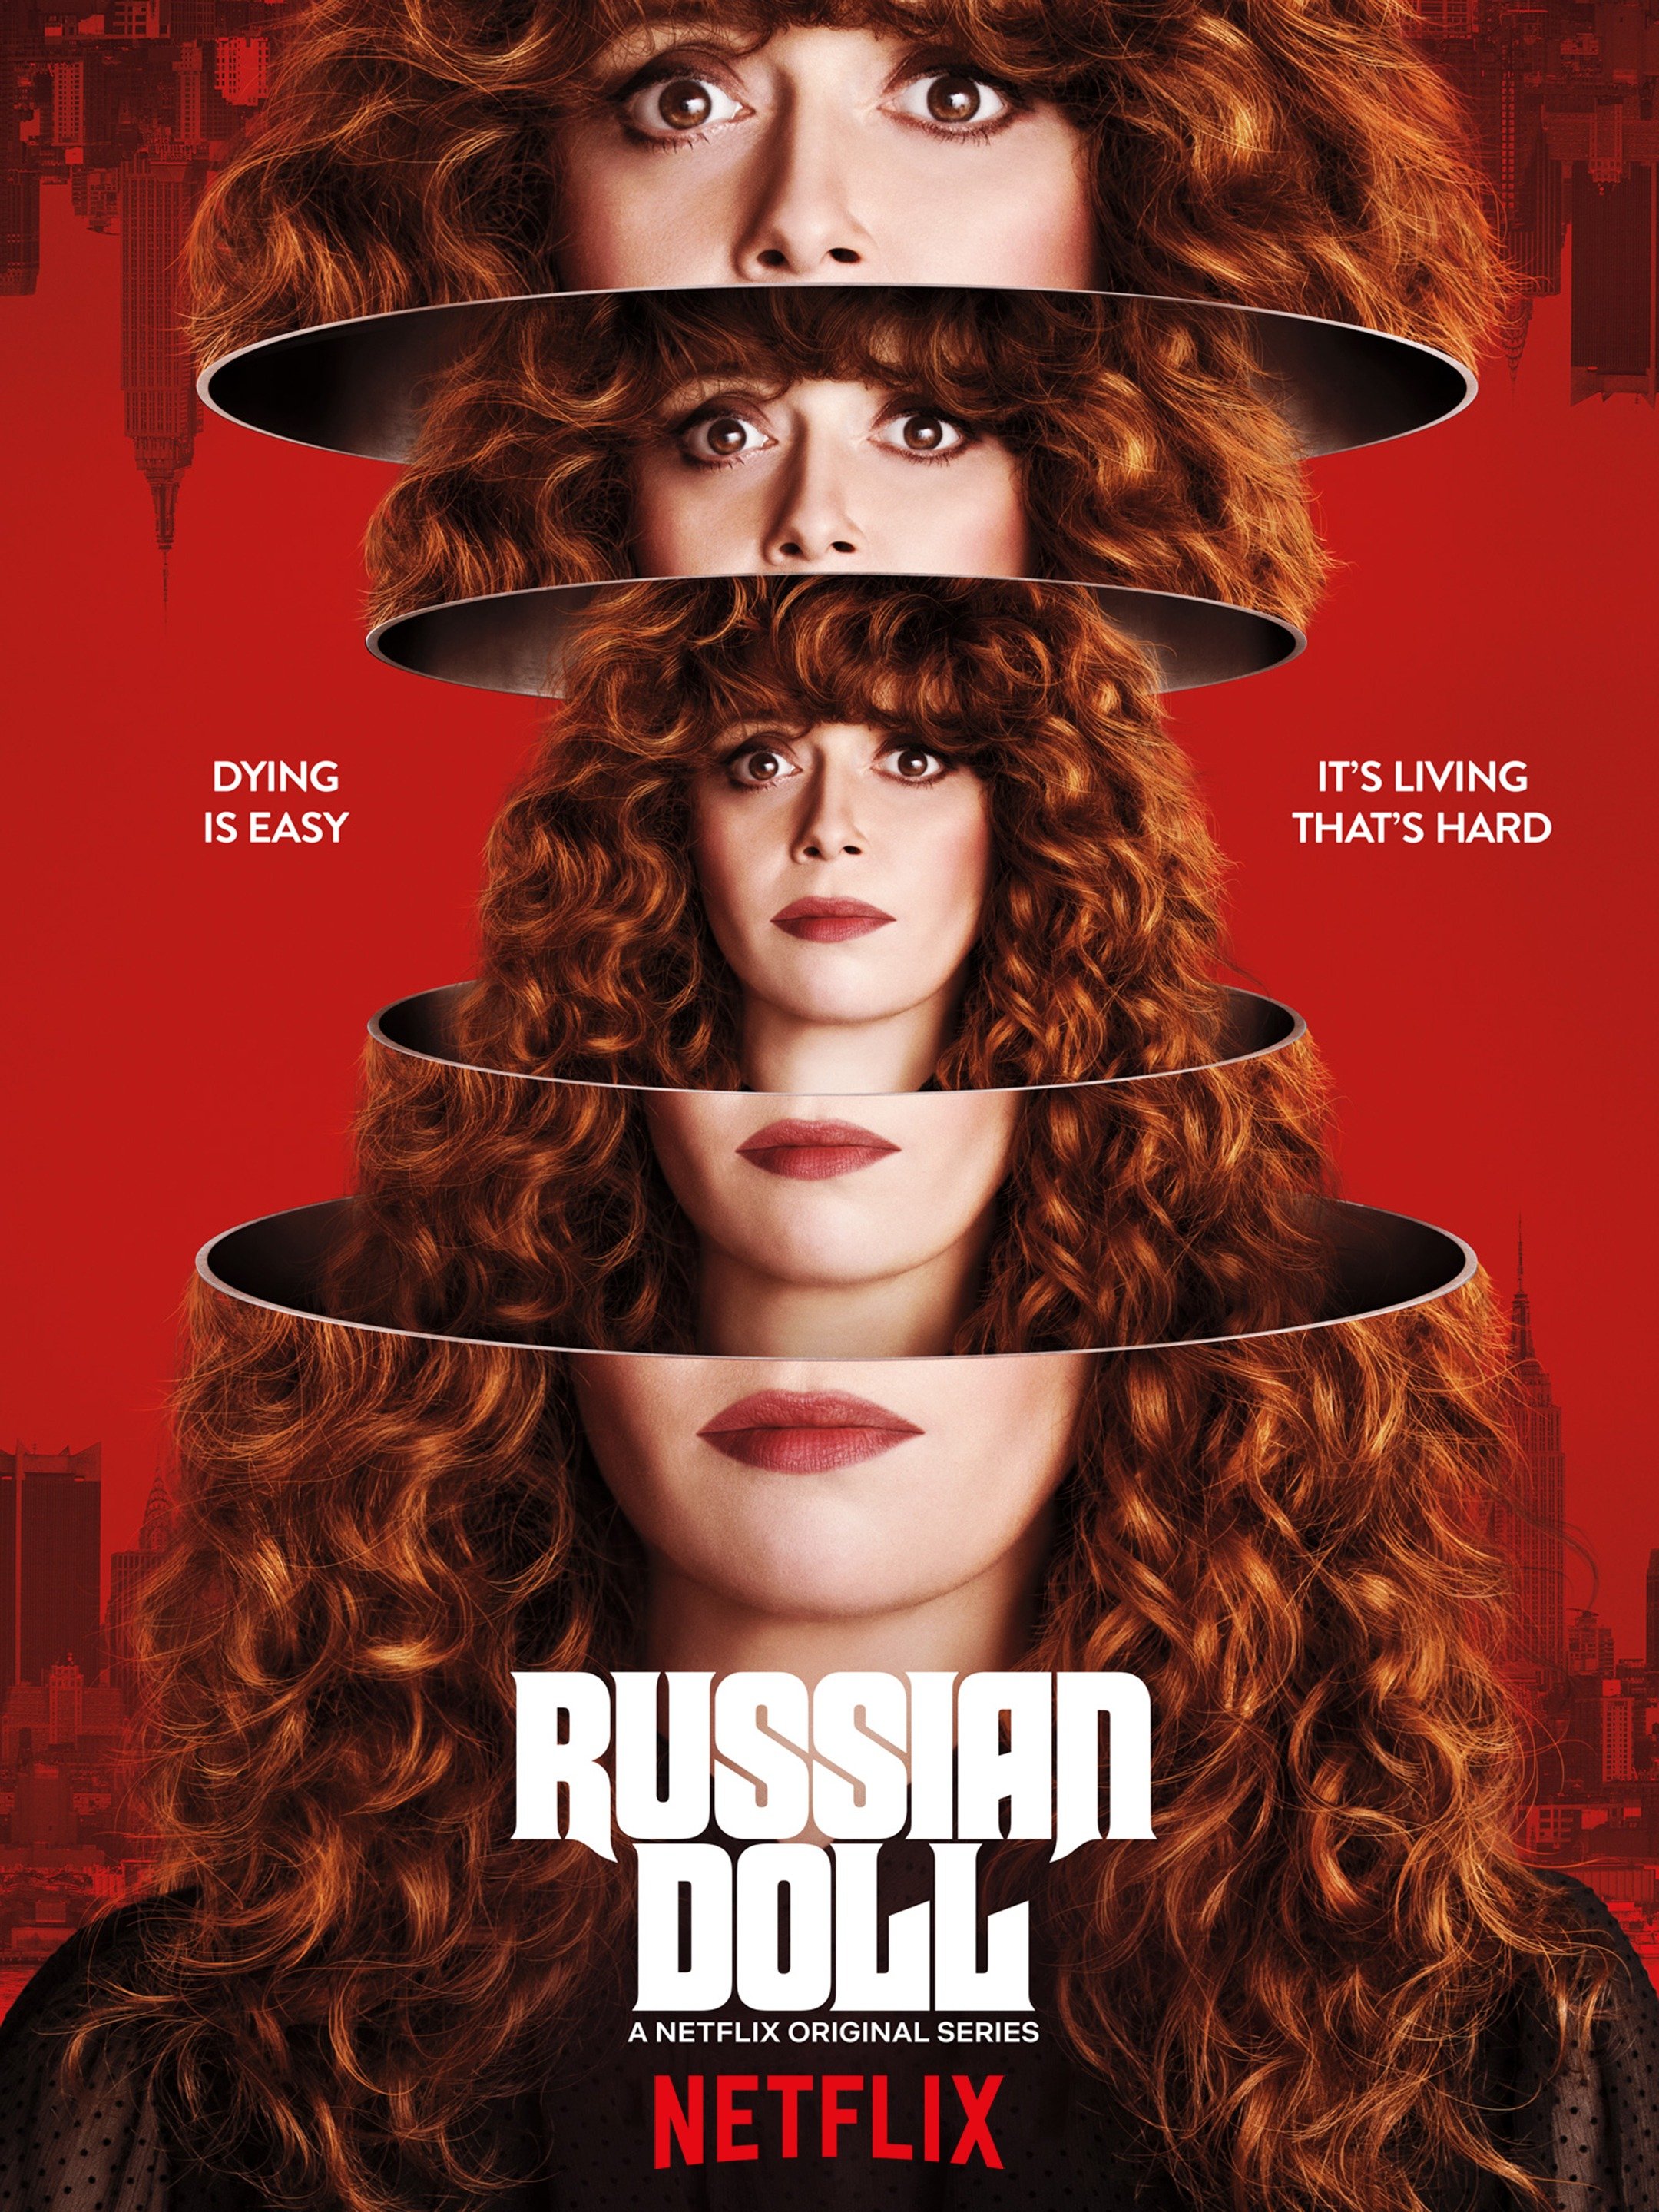 Russian Doll image photo